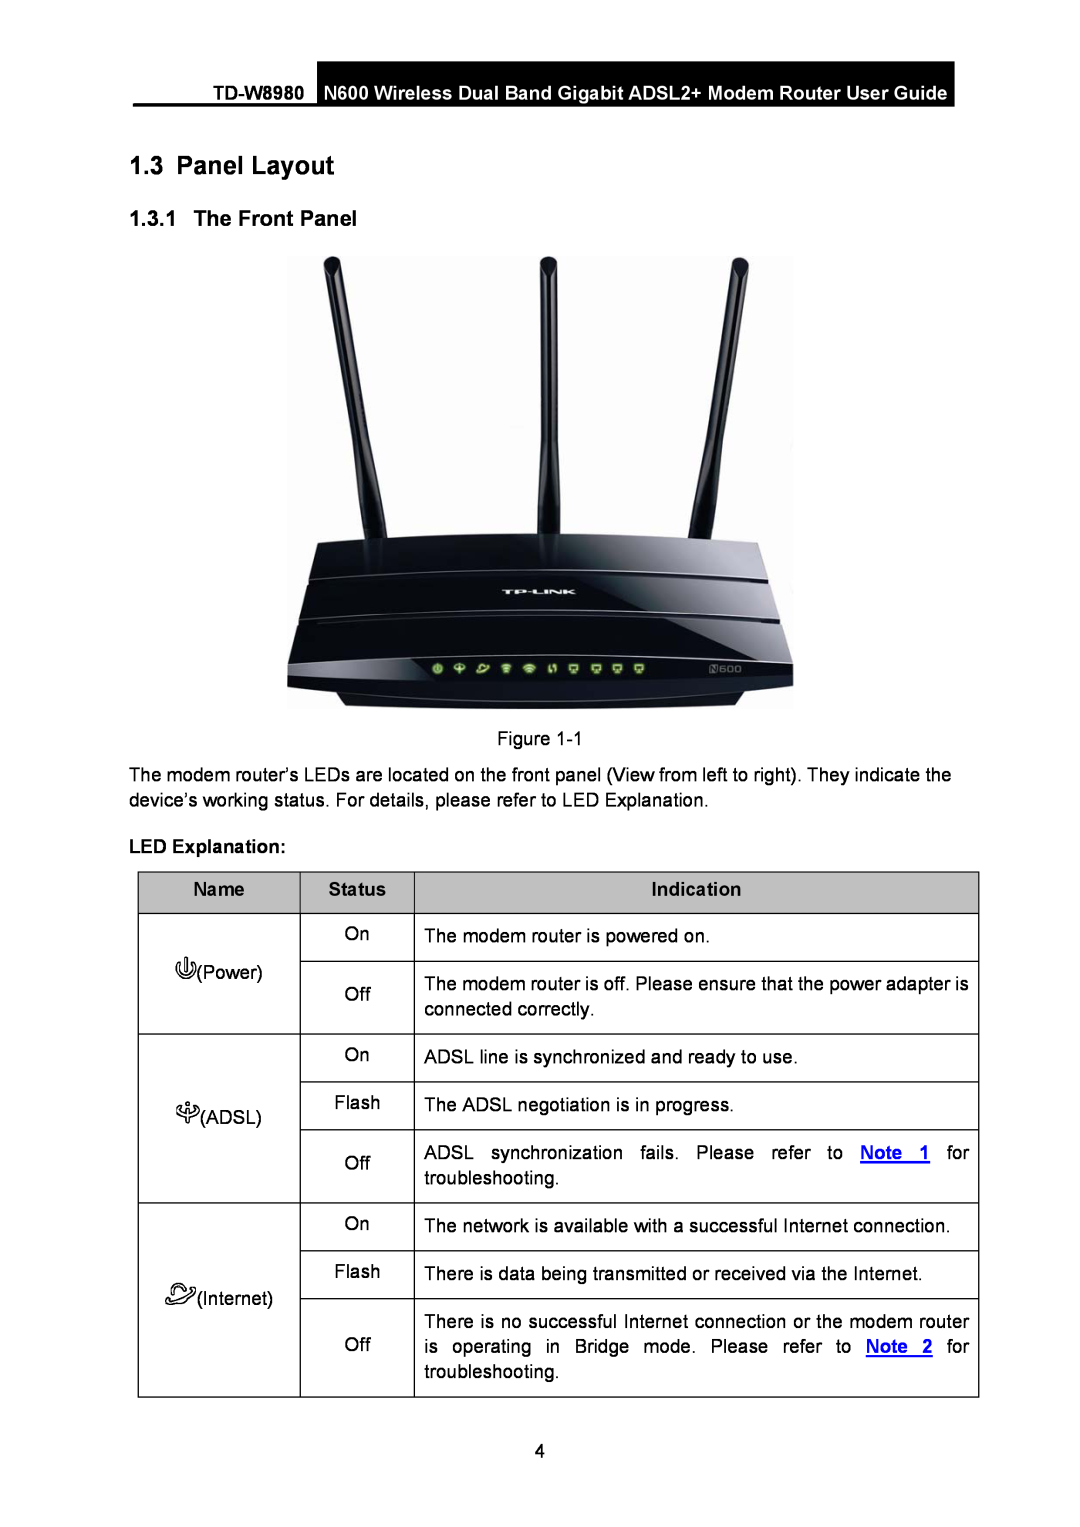 TP-Link TD-W8980 manual Panel Layout, The Front Panel, N600 Wireless Dual Band Gigabit ADSL2+ Modem Router User Guide, Name 